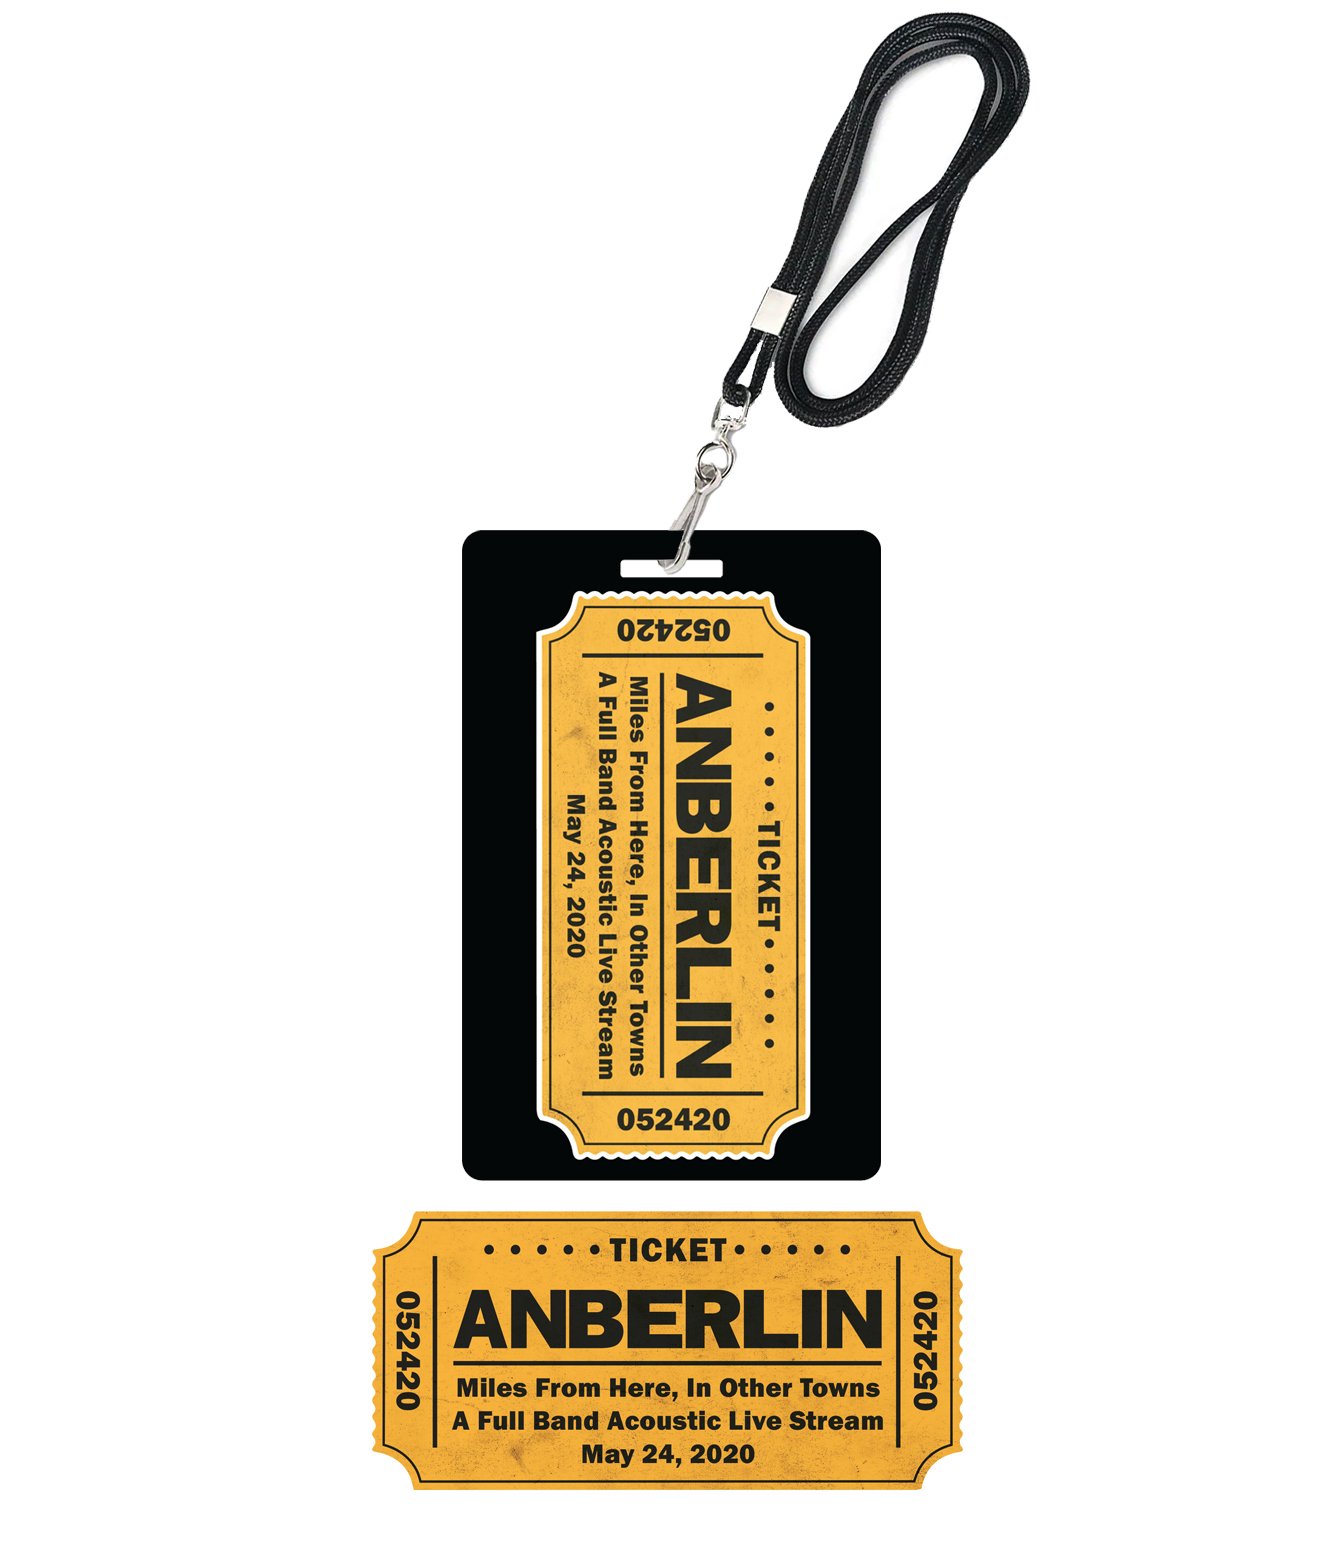 Anberlin Miles From Here In Other Towns - Live Stream Bundle #2